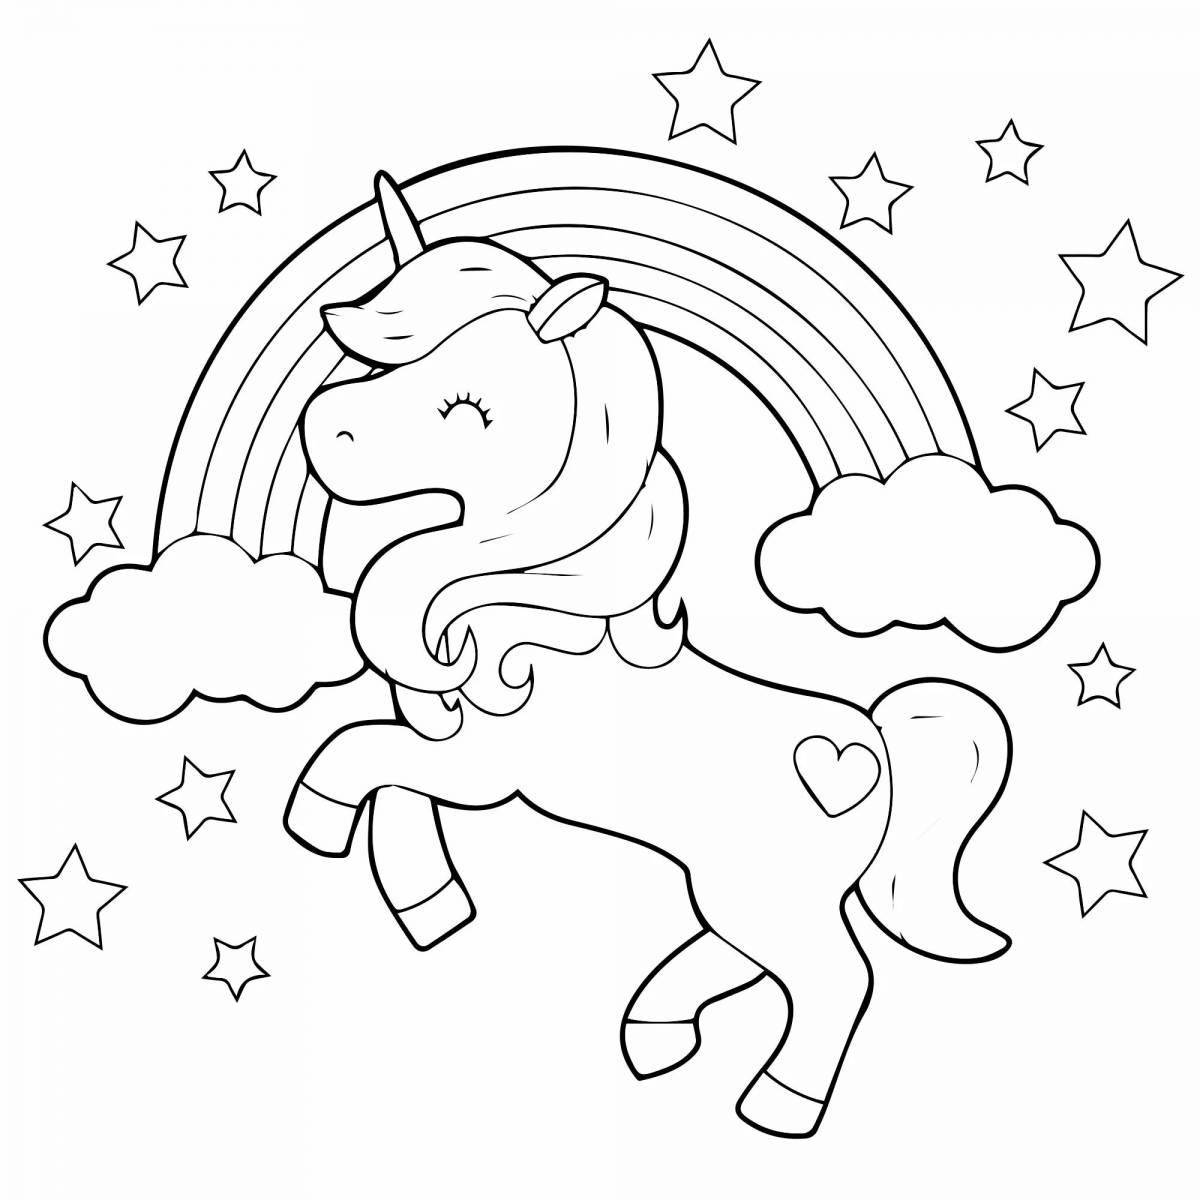 Sparkly unicorn pattern for kids